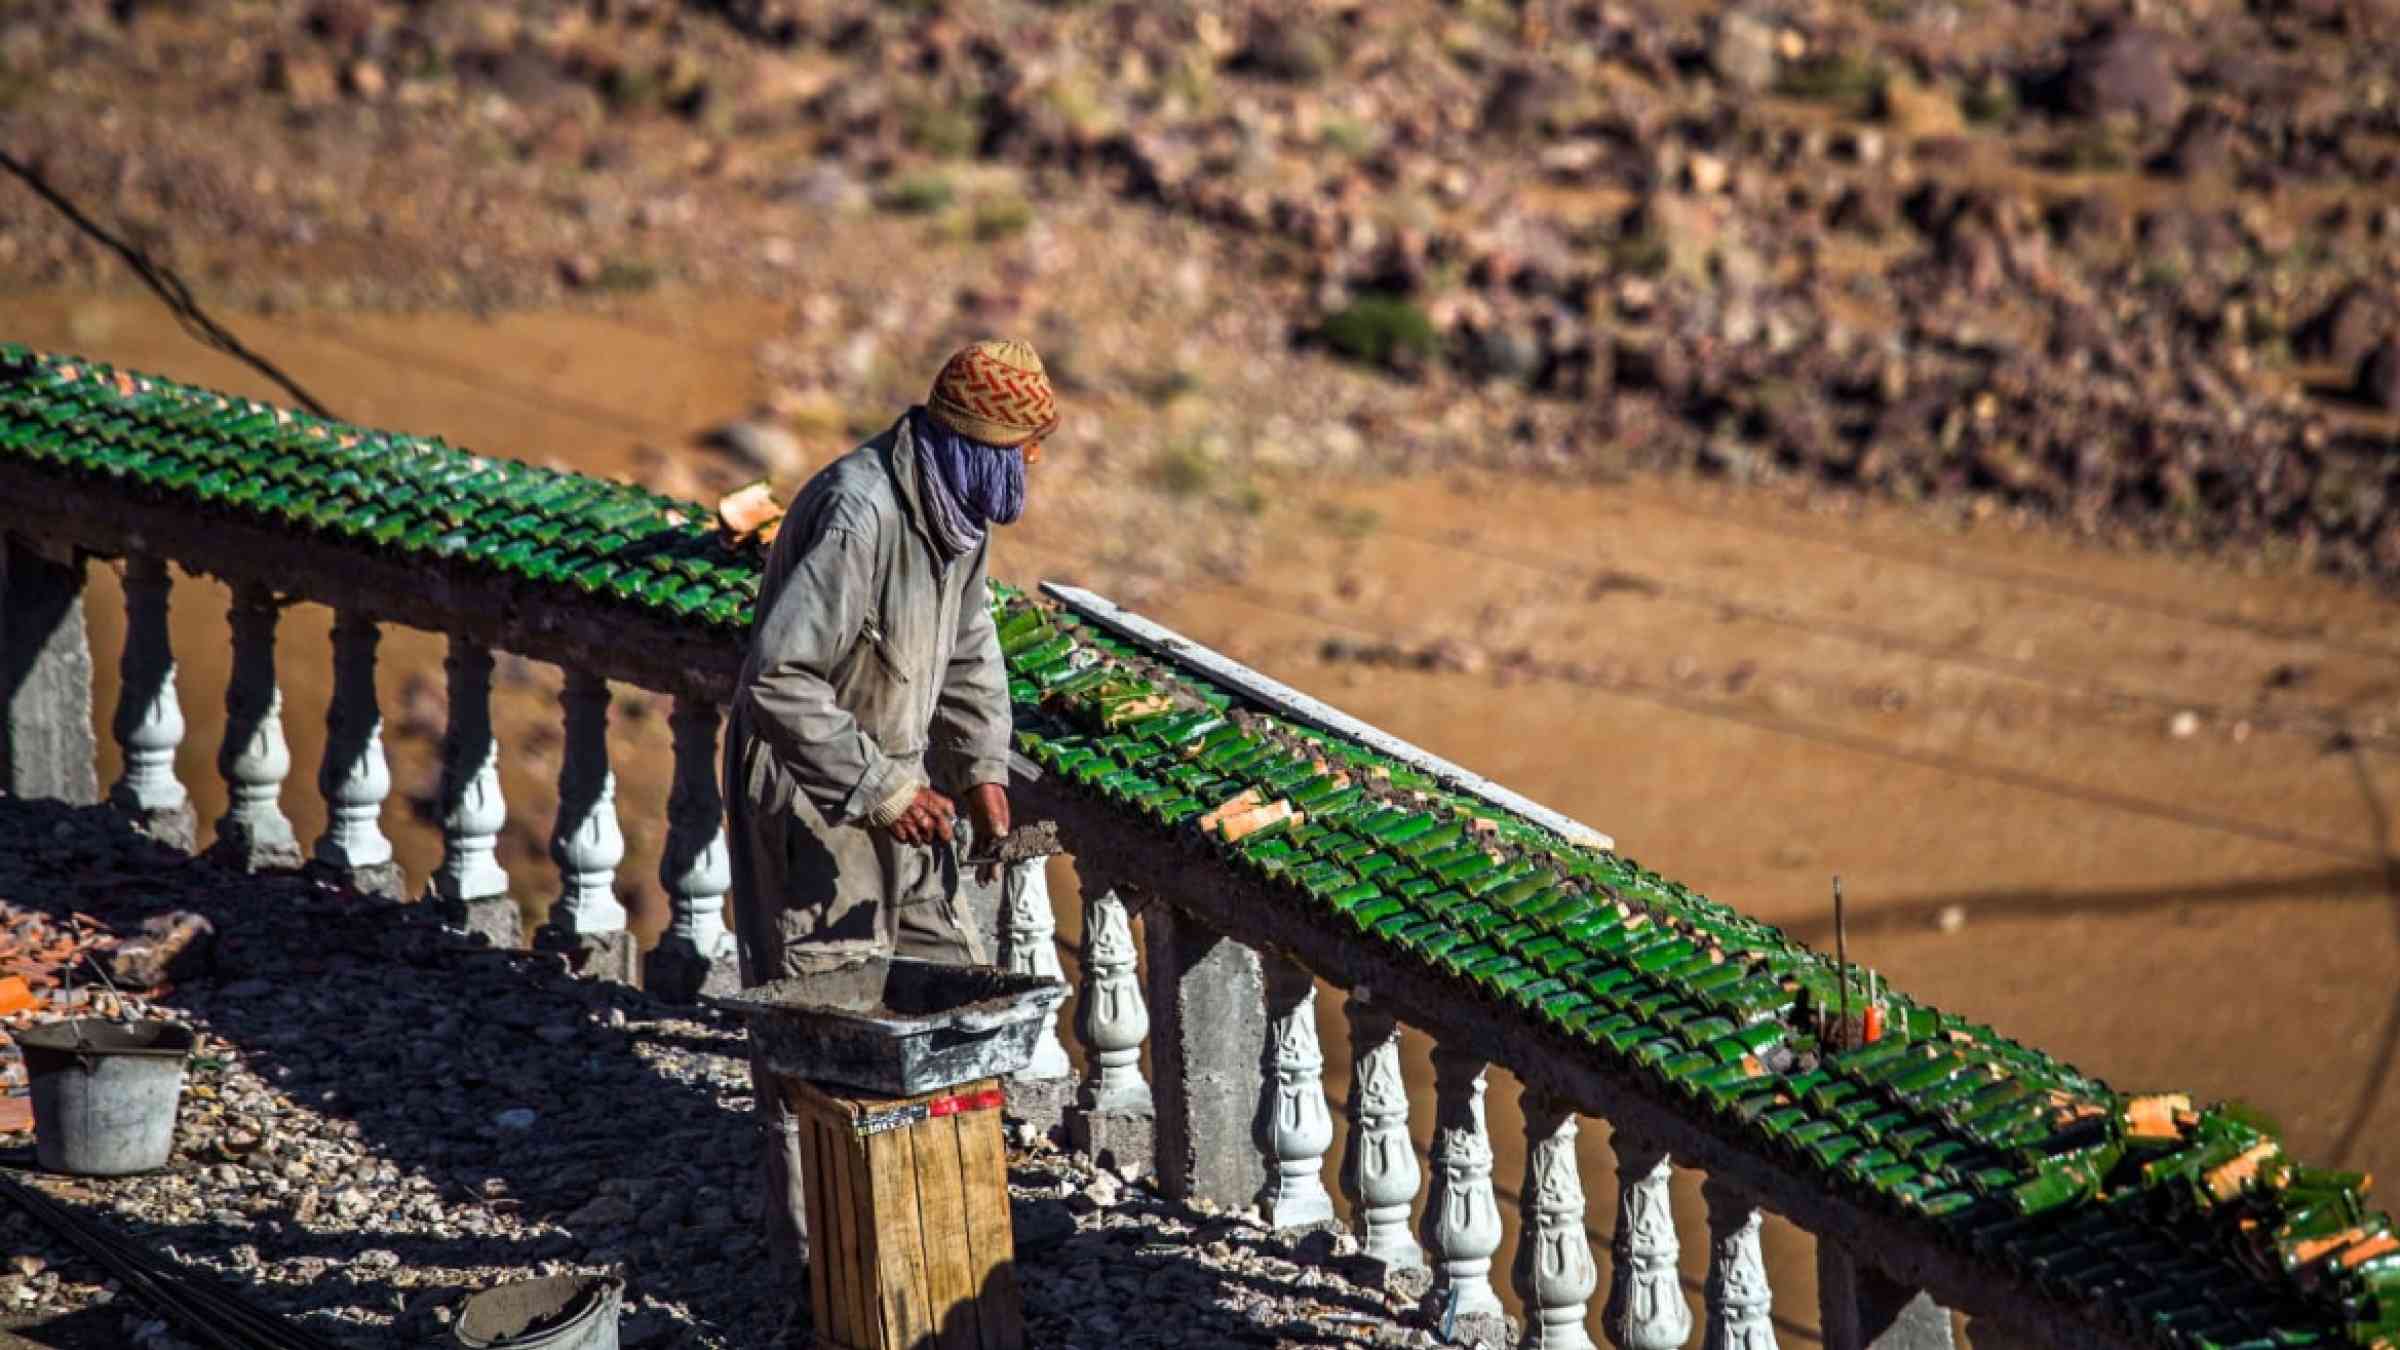 A Moroccan bricklayer prepares a surface for bricklaying in Tizi N'Tichka, Morocco